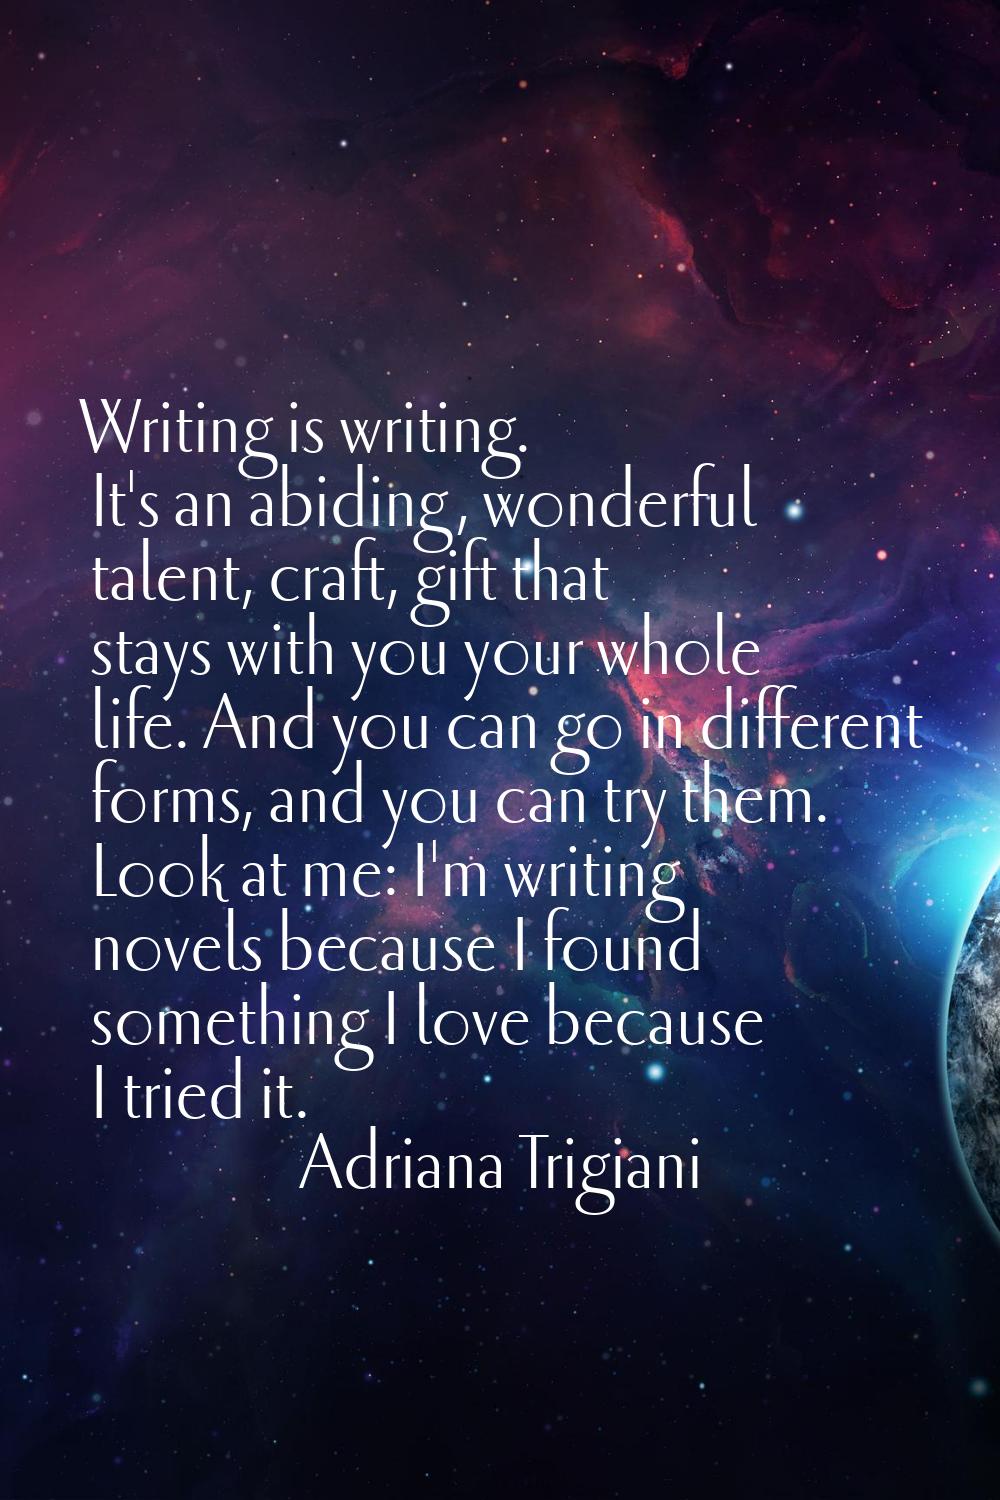 Writing is writing. It's an abiding, wonderful talent, craft, gift that stays with you your whole l